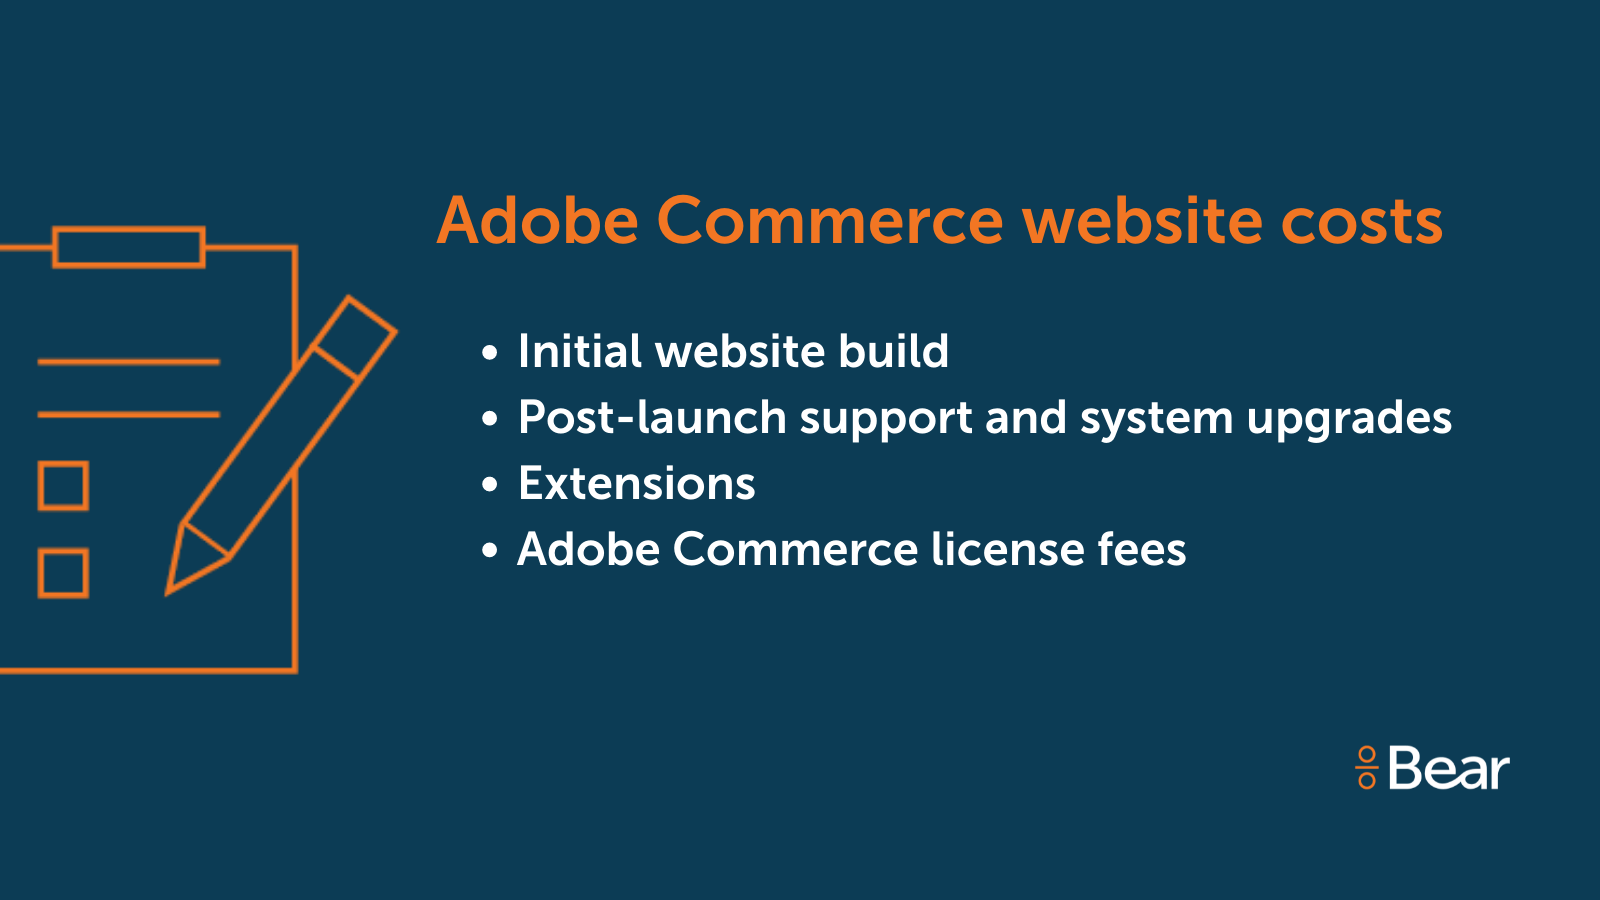 The cost of an Adobe Commerce website.